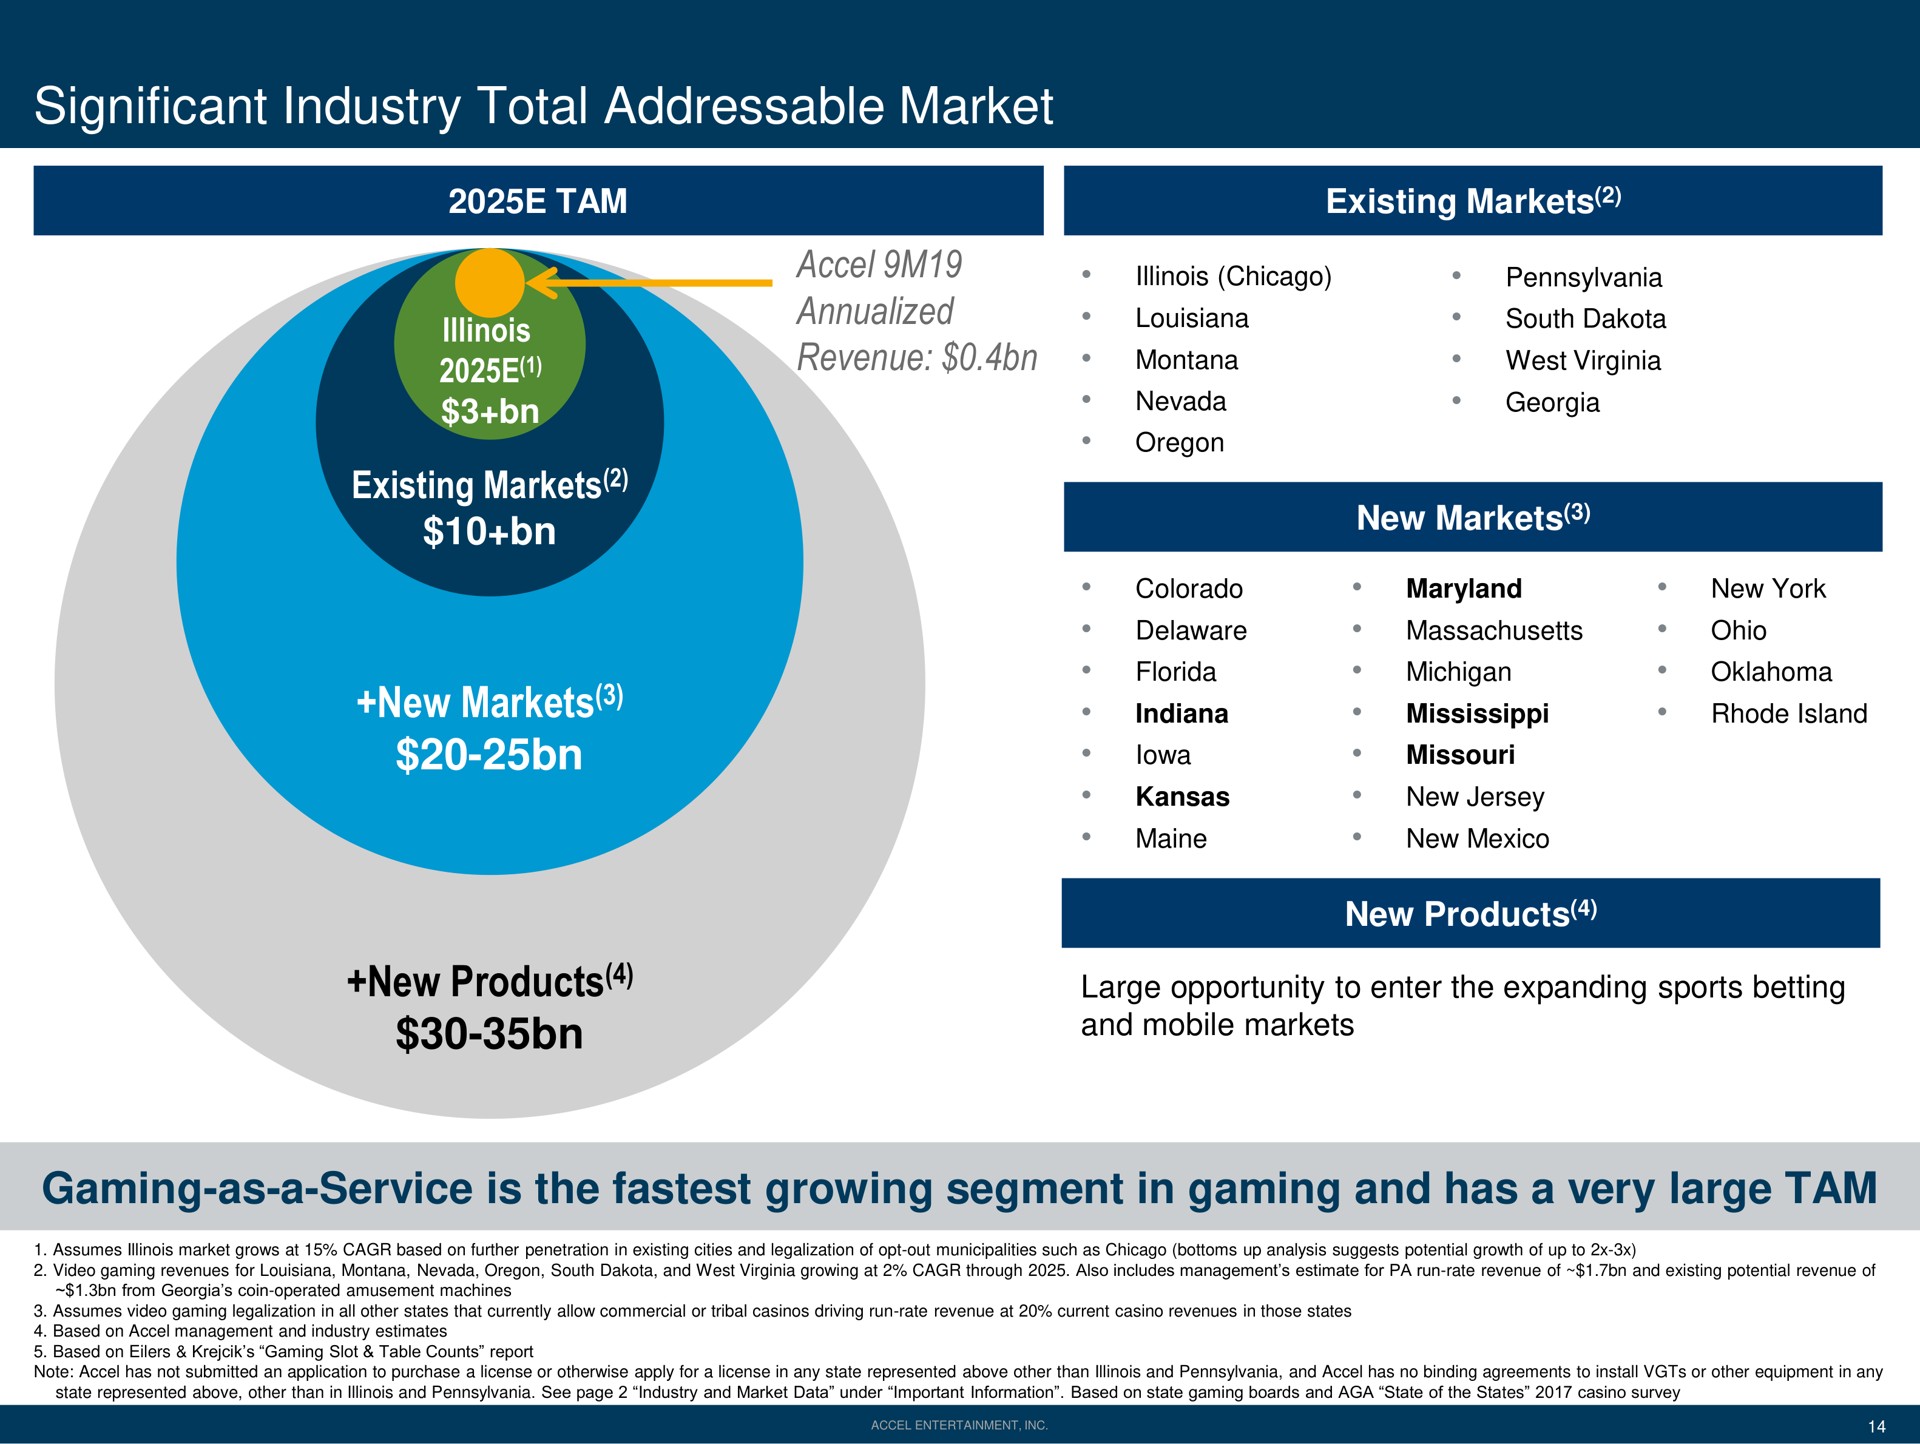 significant industry total market revenue existing markets new markets new products gaming as a service is the growing segment in gaming and has a very large tam clan mobile | Accel Entertaiment